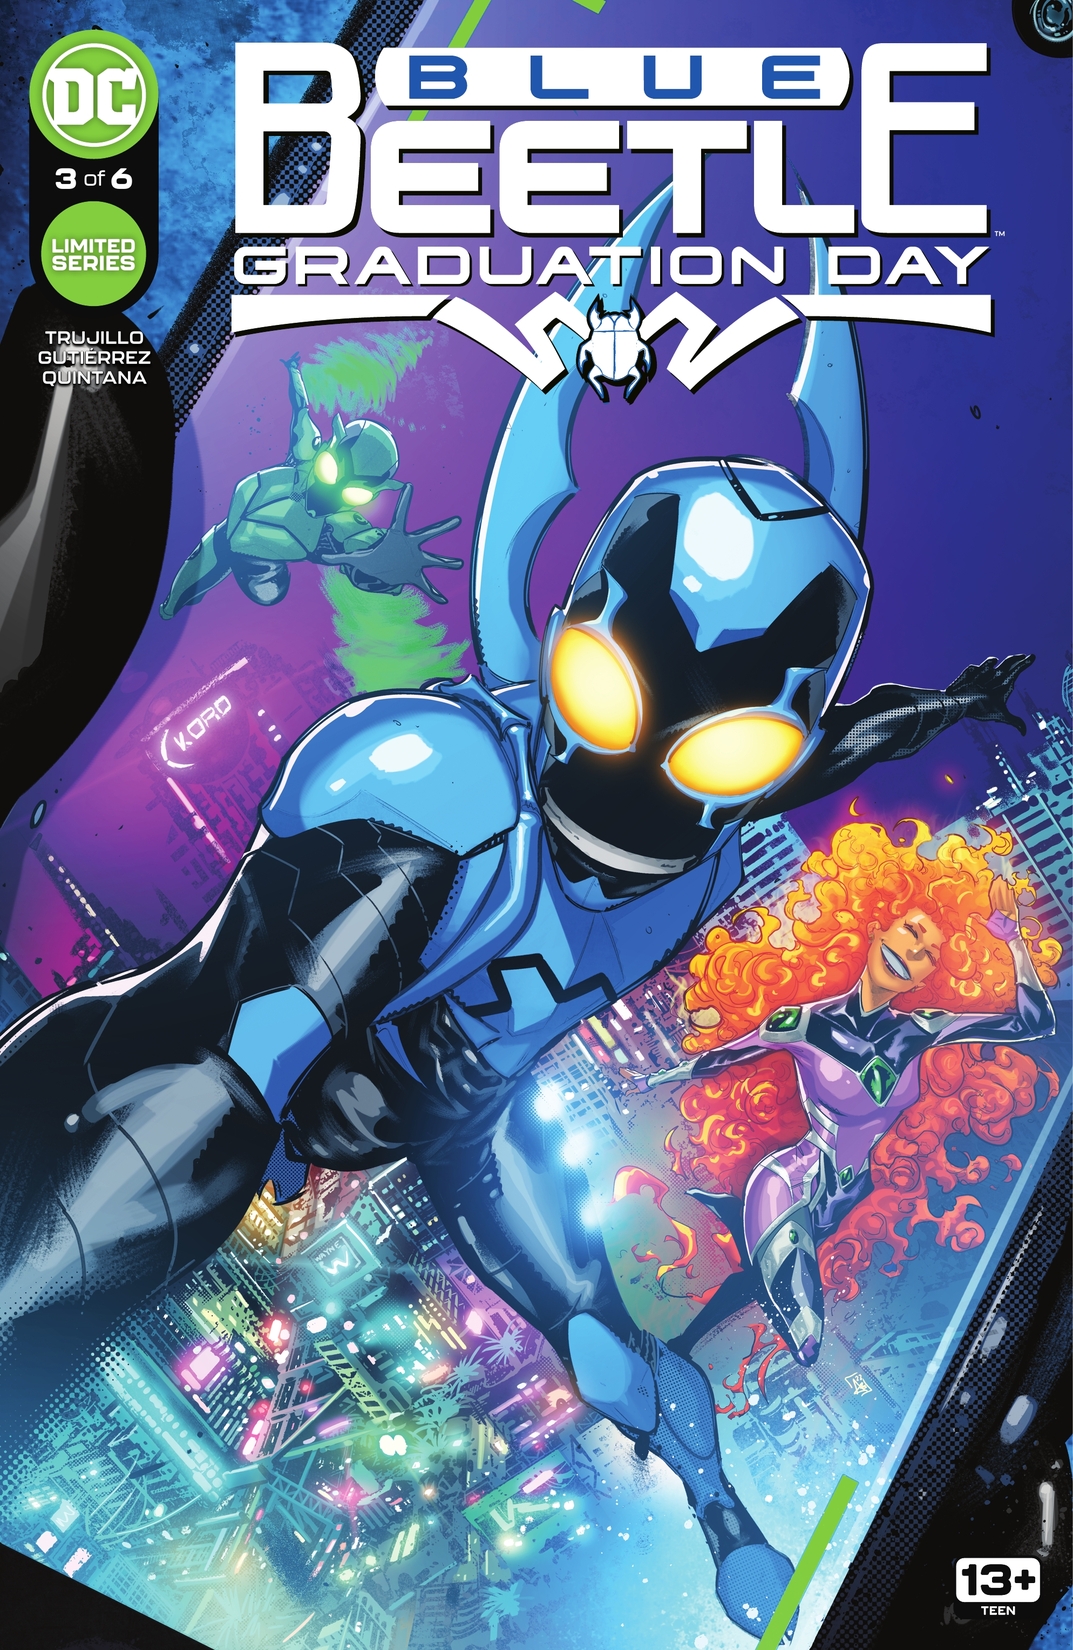 Blue Beetle: Graduation Day #3 preview images